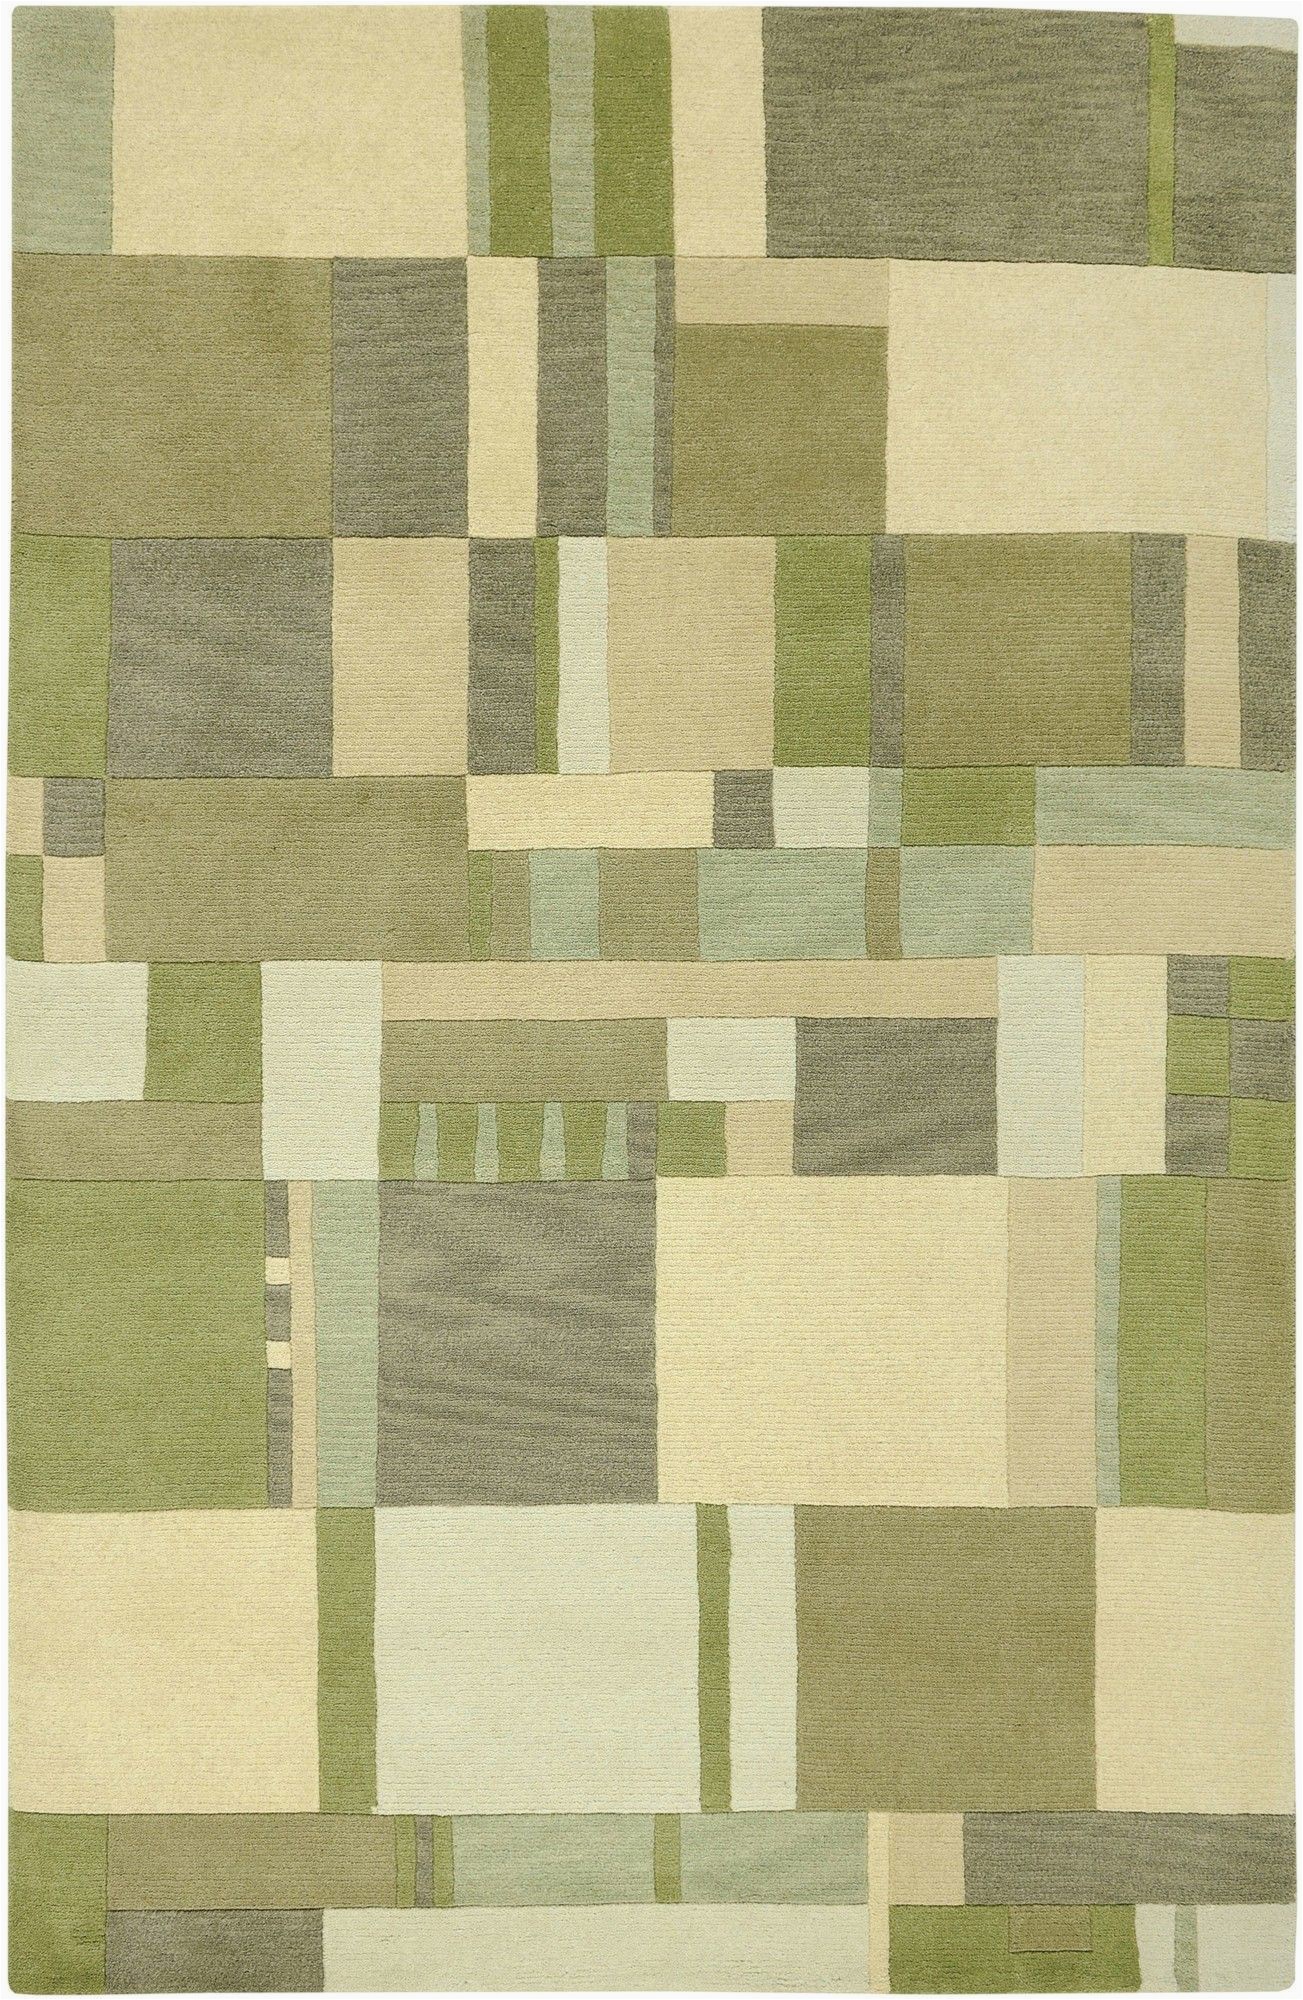 Green and Tan area Rugs Leone Hand Knotted Green Tan area Rug